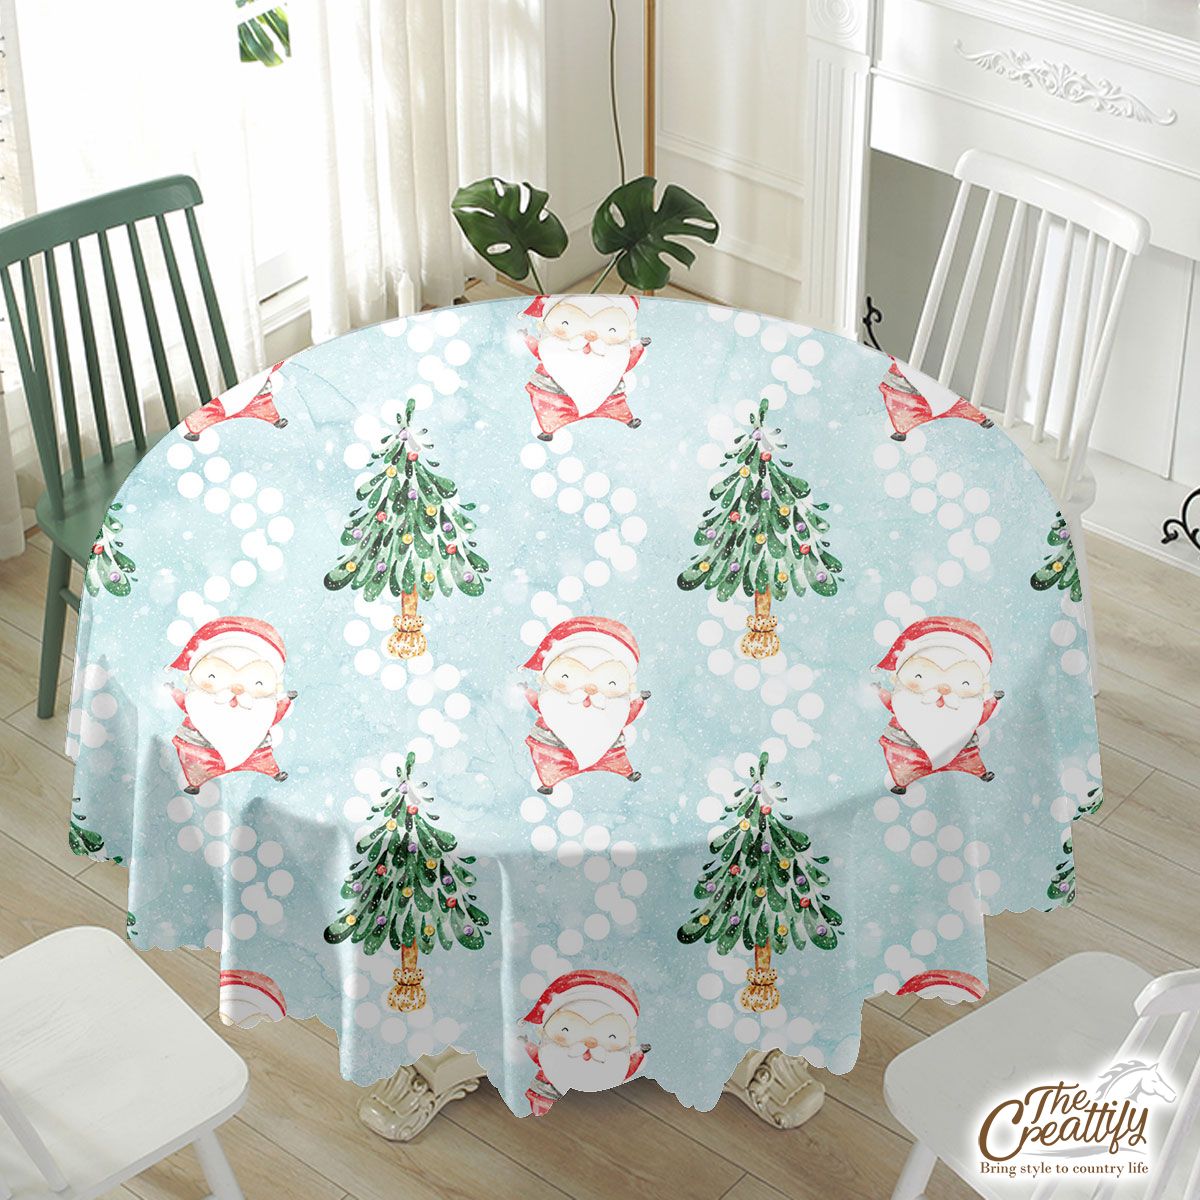 Santa Clause And Christmas Tree On Snowflake Background Waterproof Tablecloth